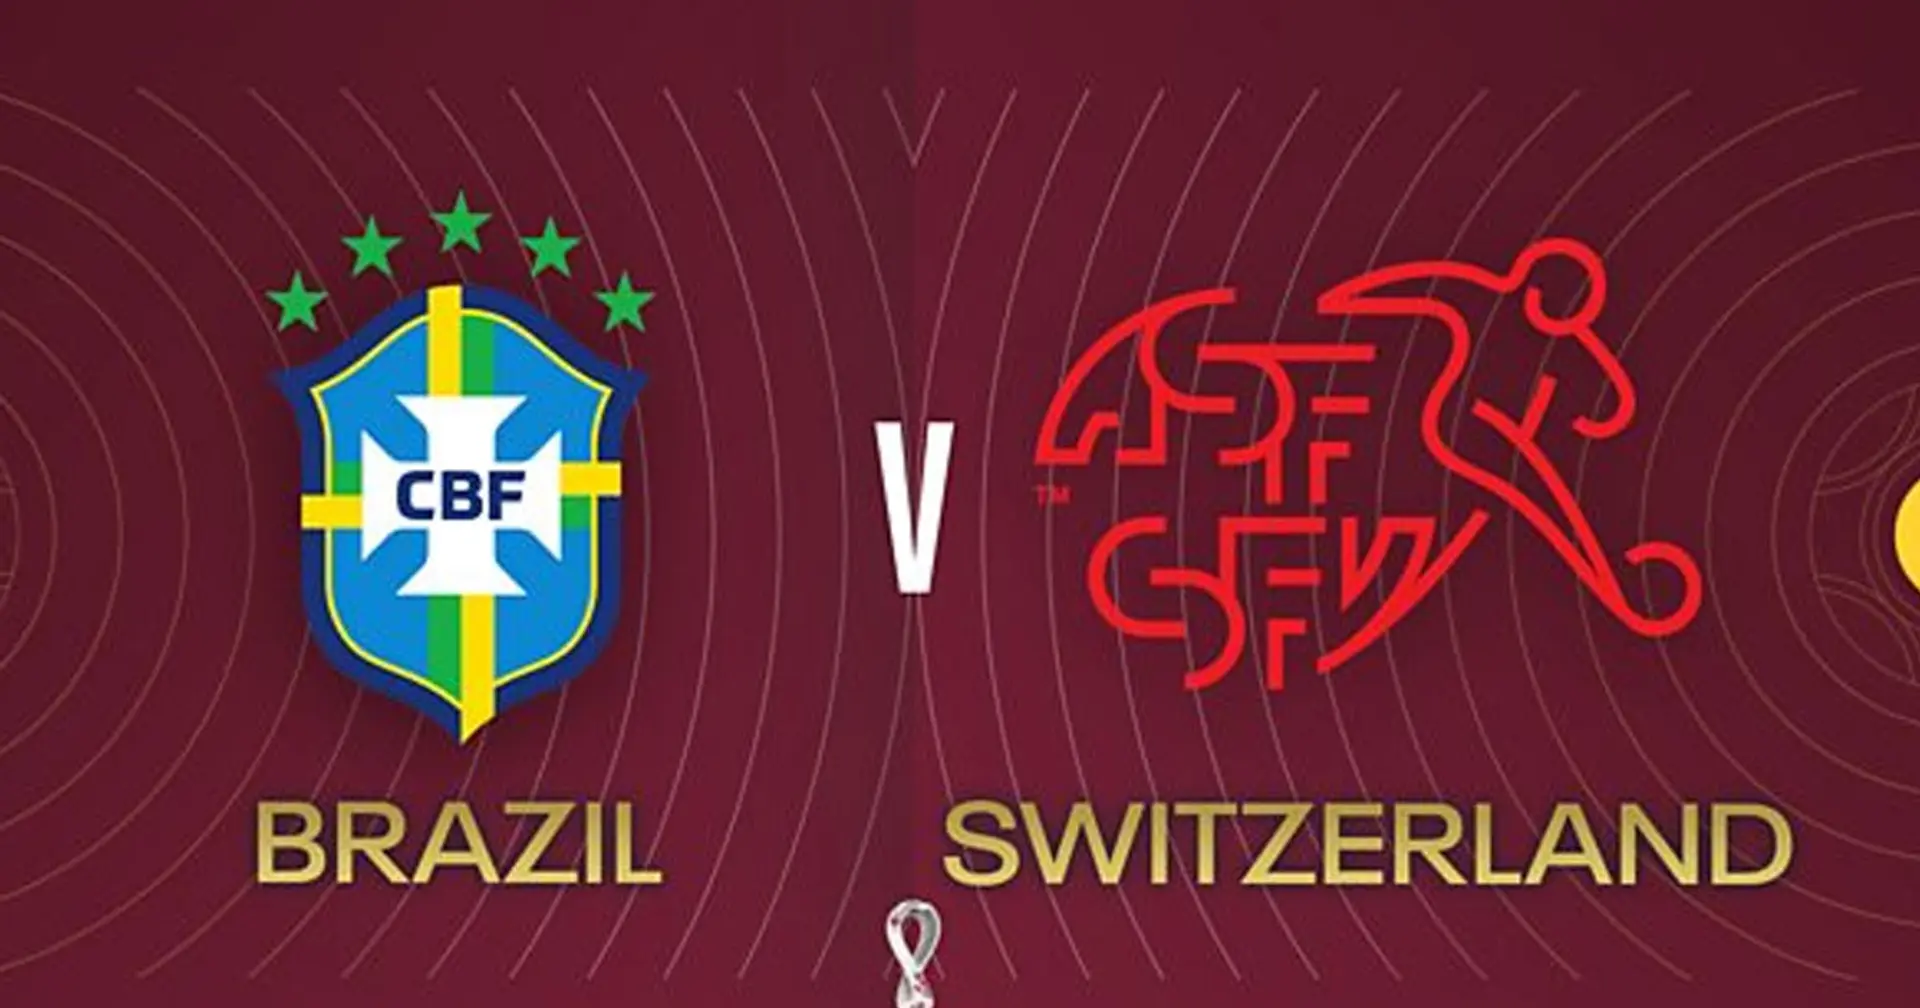 Brazil vs Switzerland: Official team lineups for the World Cup clash revealed